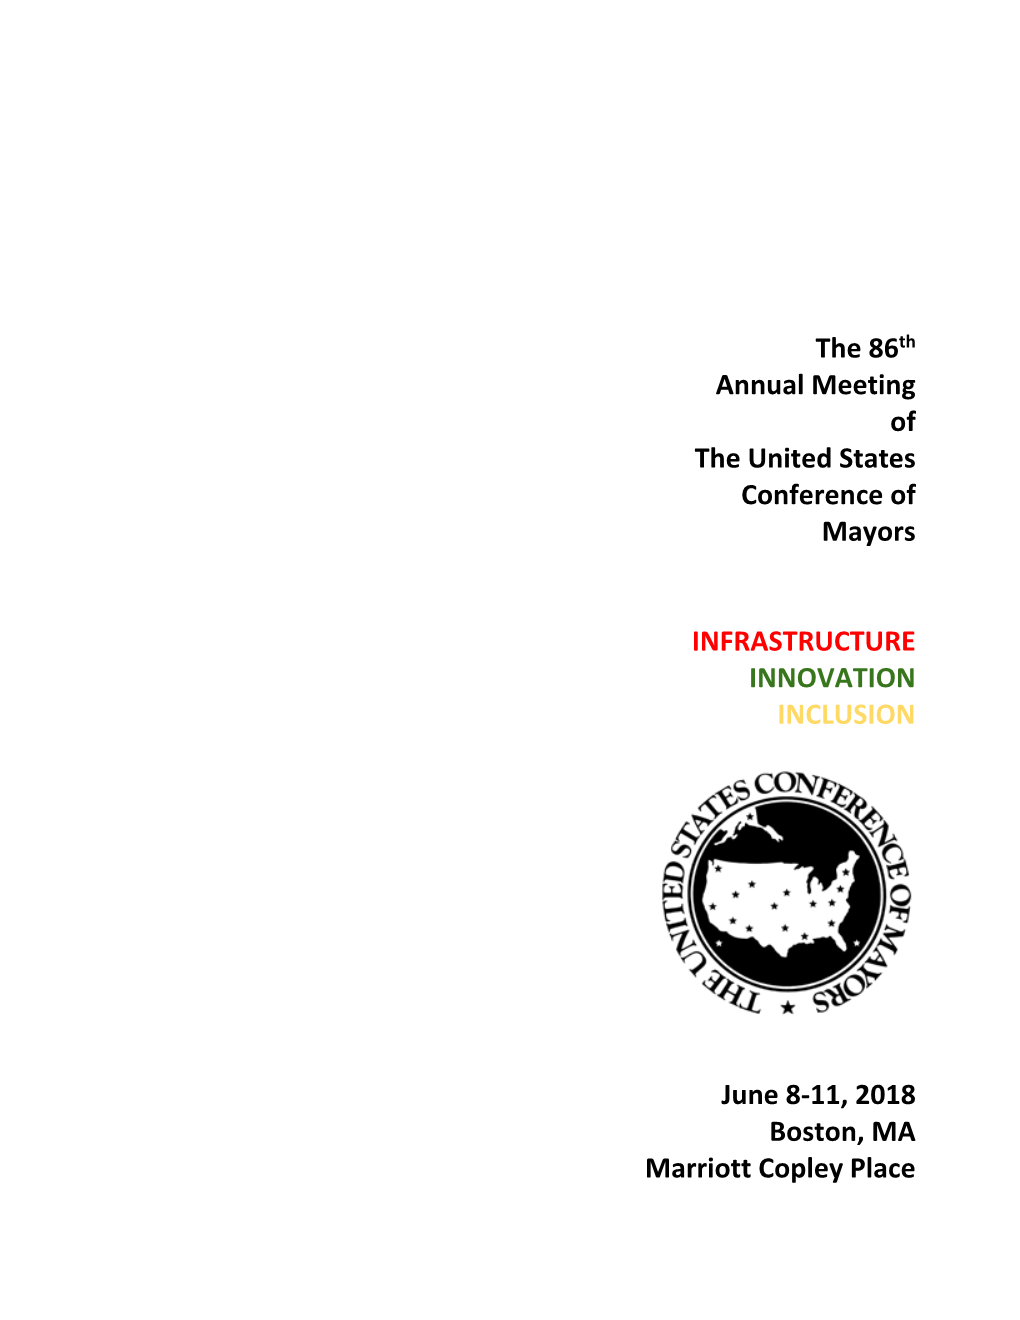 The 86Th Annual Meeting of the United States Conference of Mayors